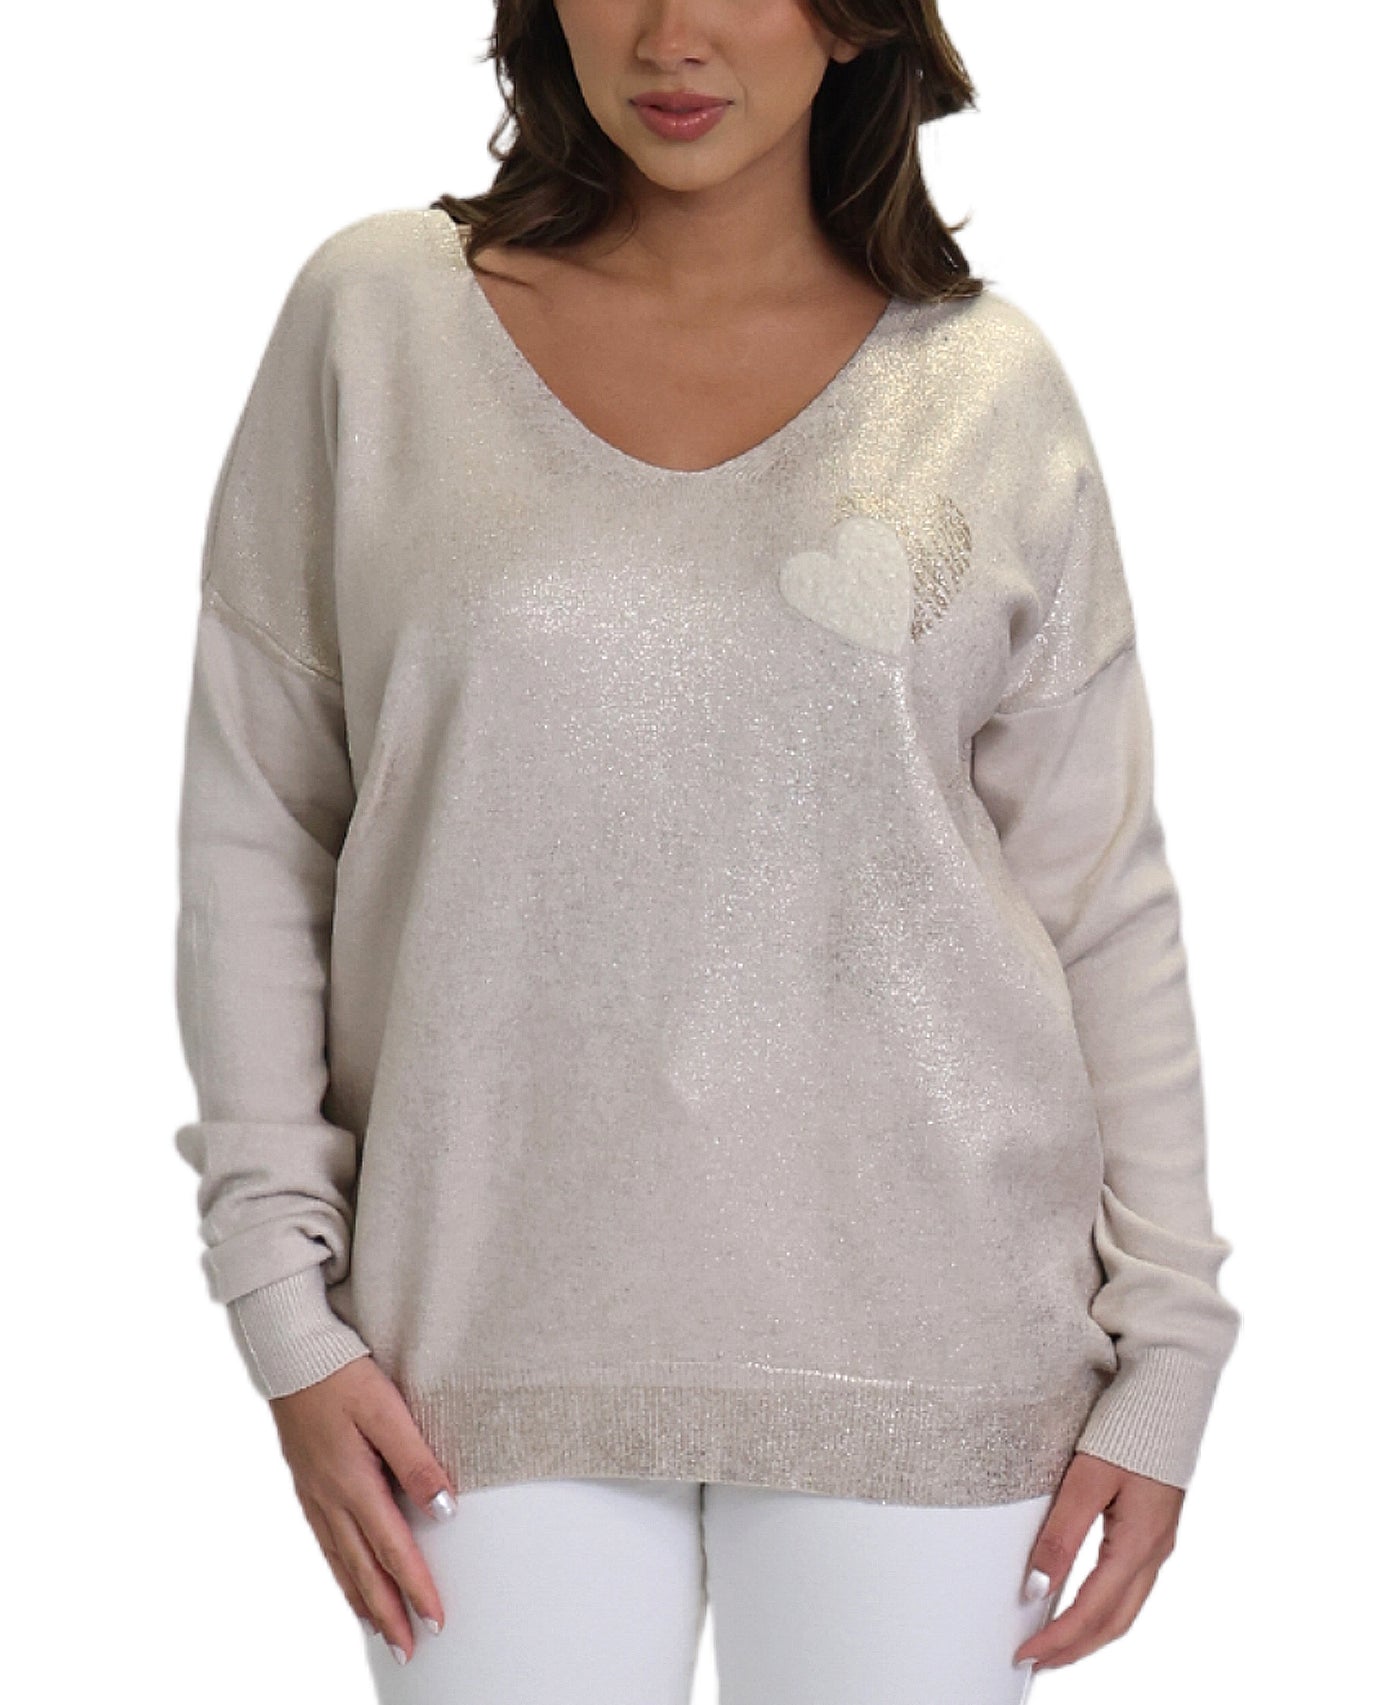 Gold Foil Sweater w/ Hearts image 1